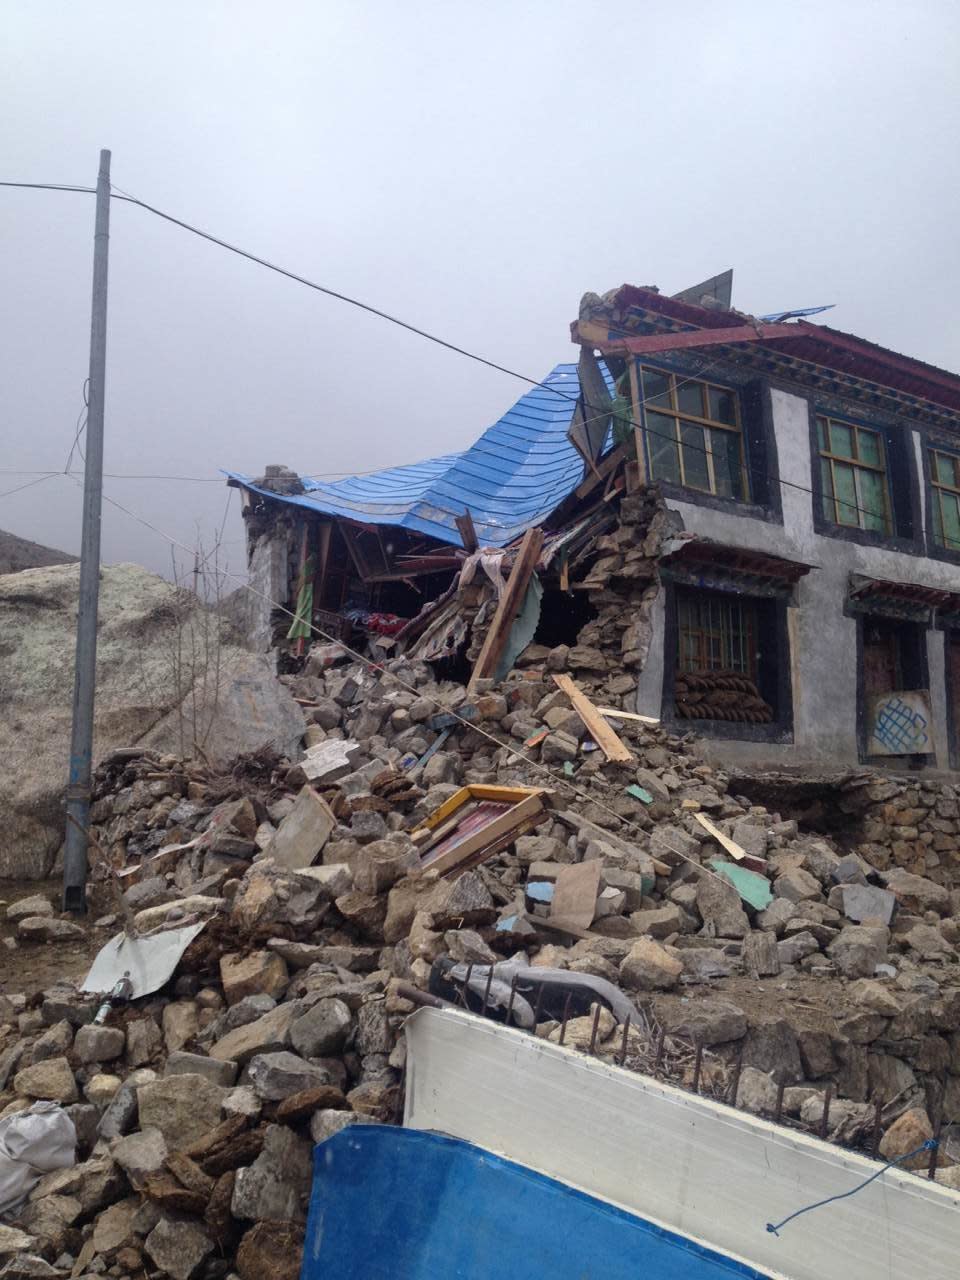 Houses collapse after tremors from the Nepal earthquake on April 25, 2015 in Tibet Autonomous Region of China. (ChinaFotoPress/ChinaFotoPress via Getty Images)